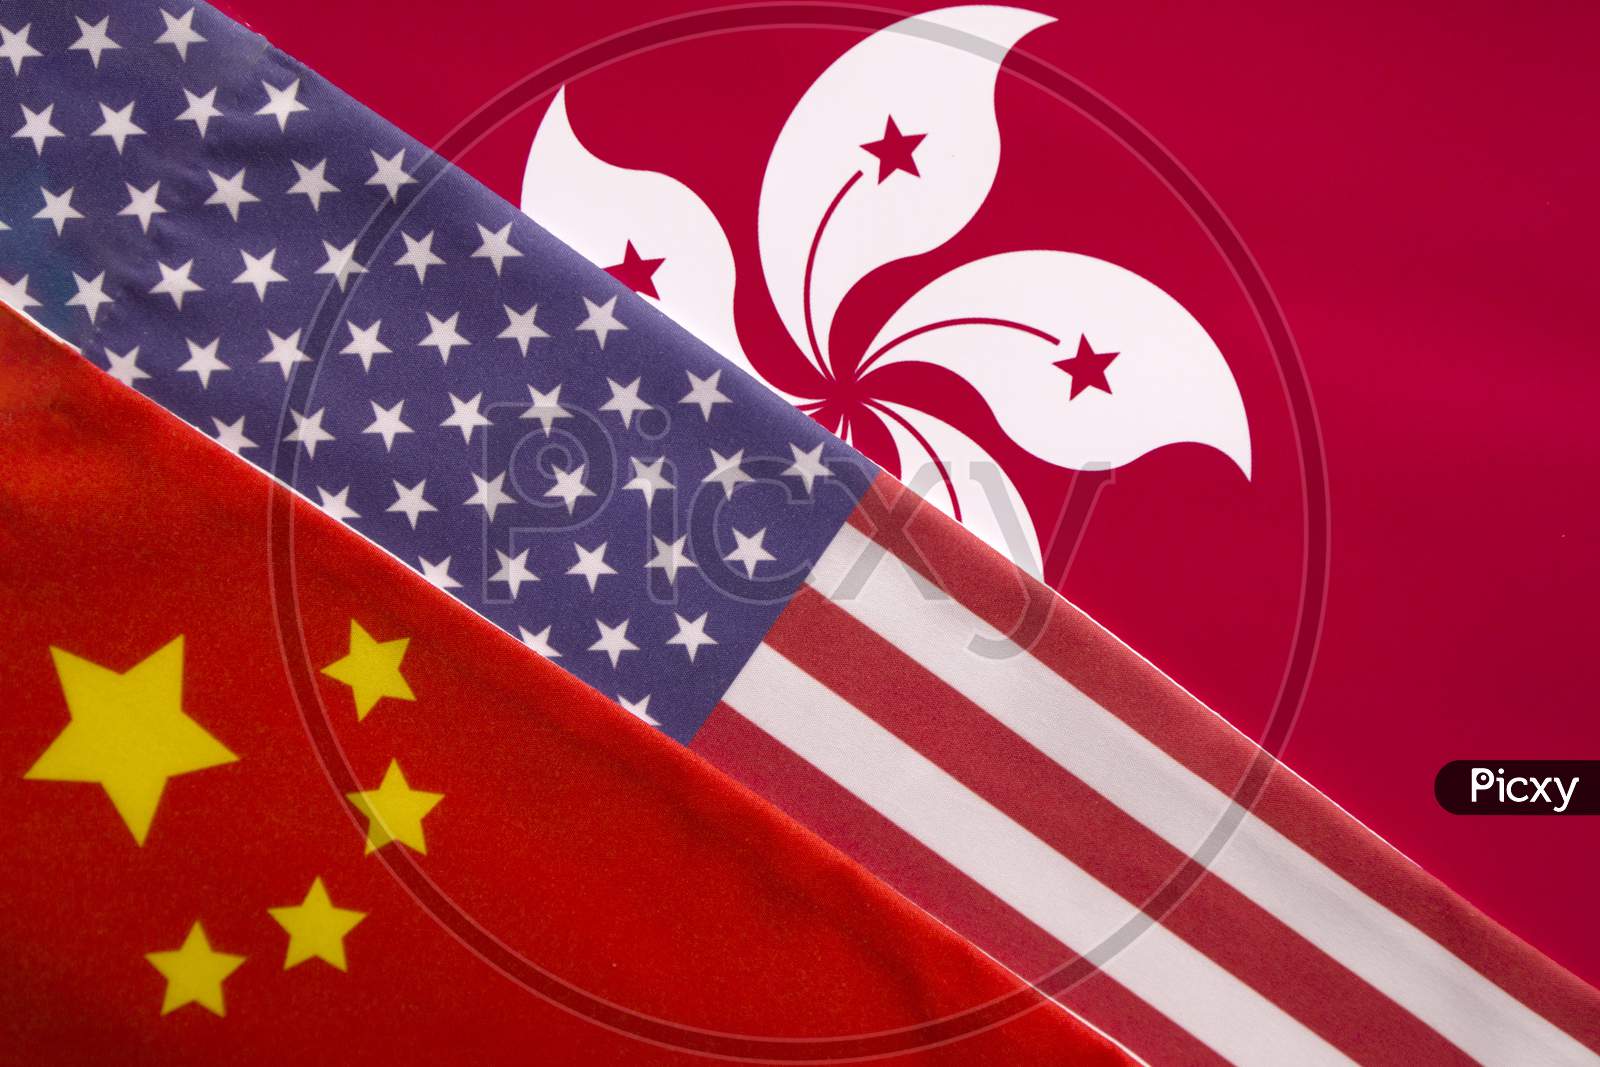 Concept Of Trilateral Relationship Between China, Honk Kong And Usa Showing With Flags